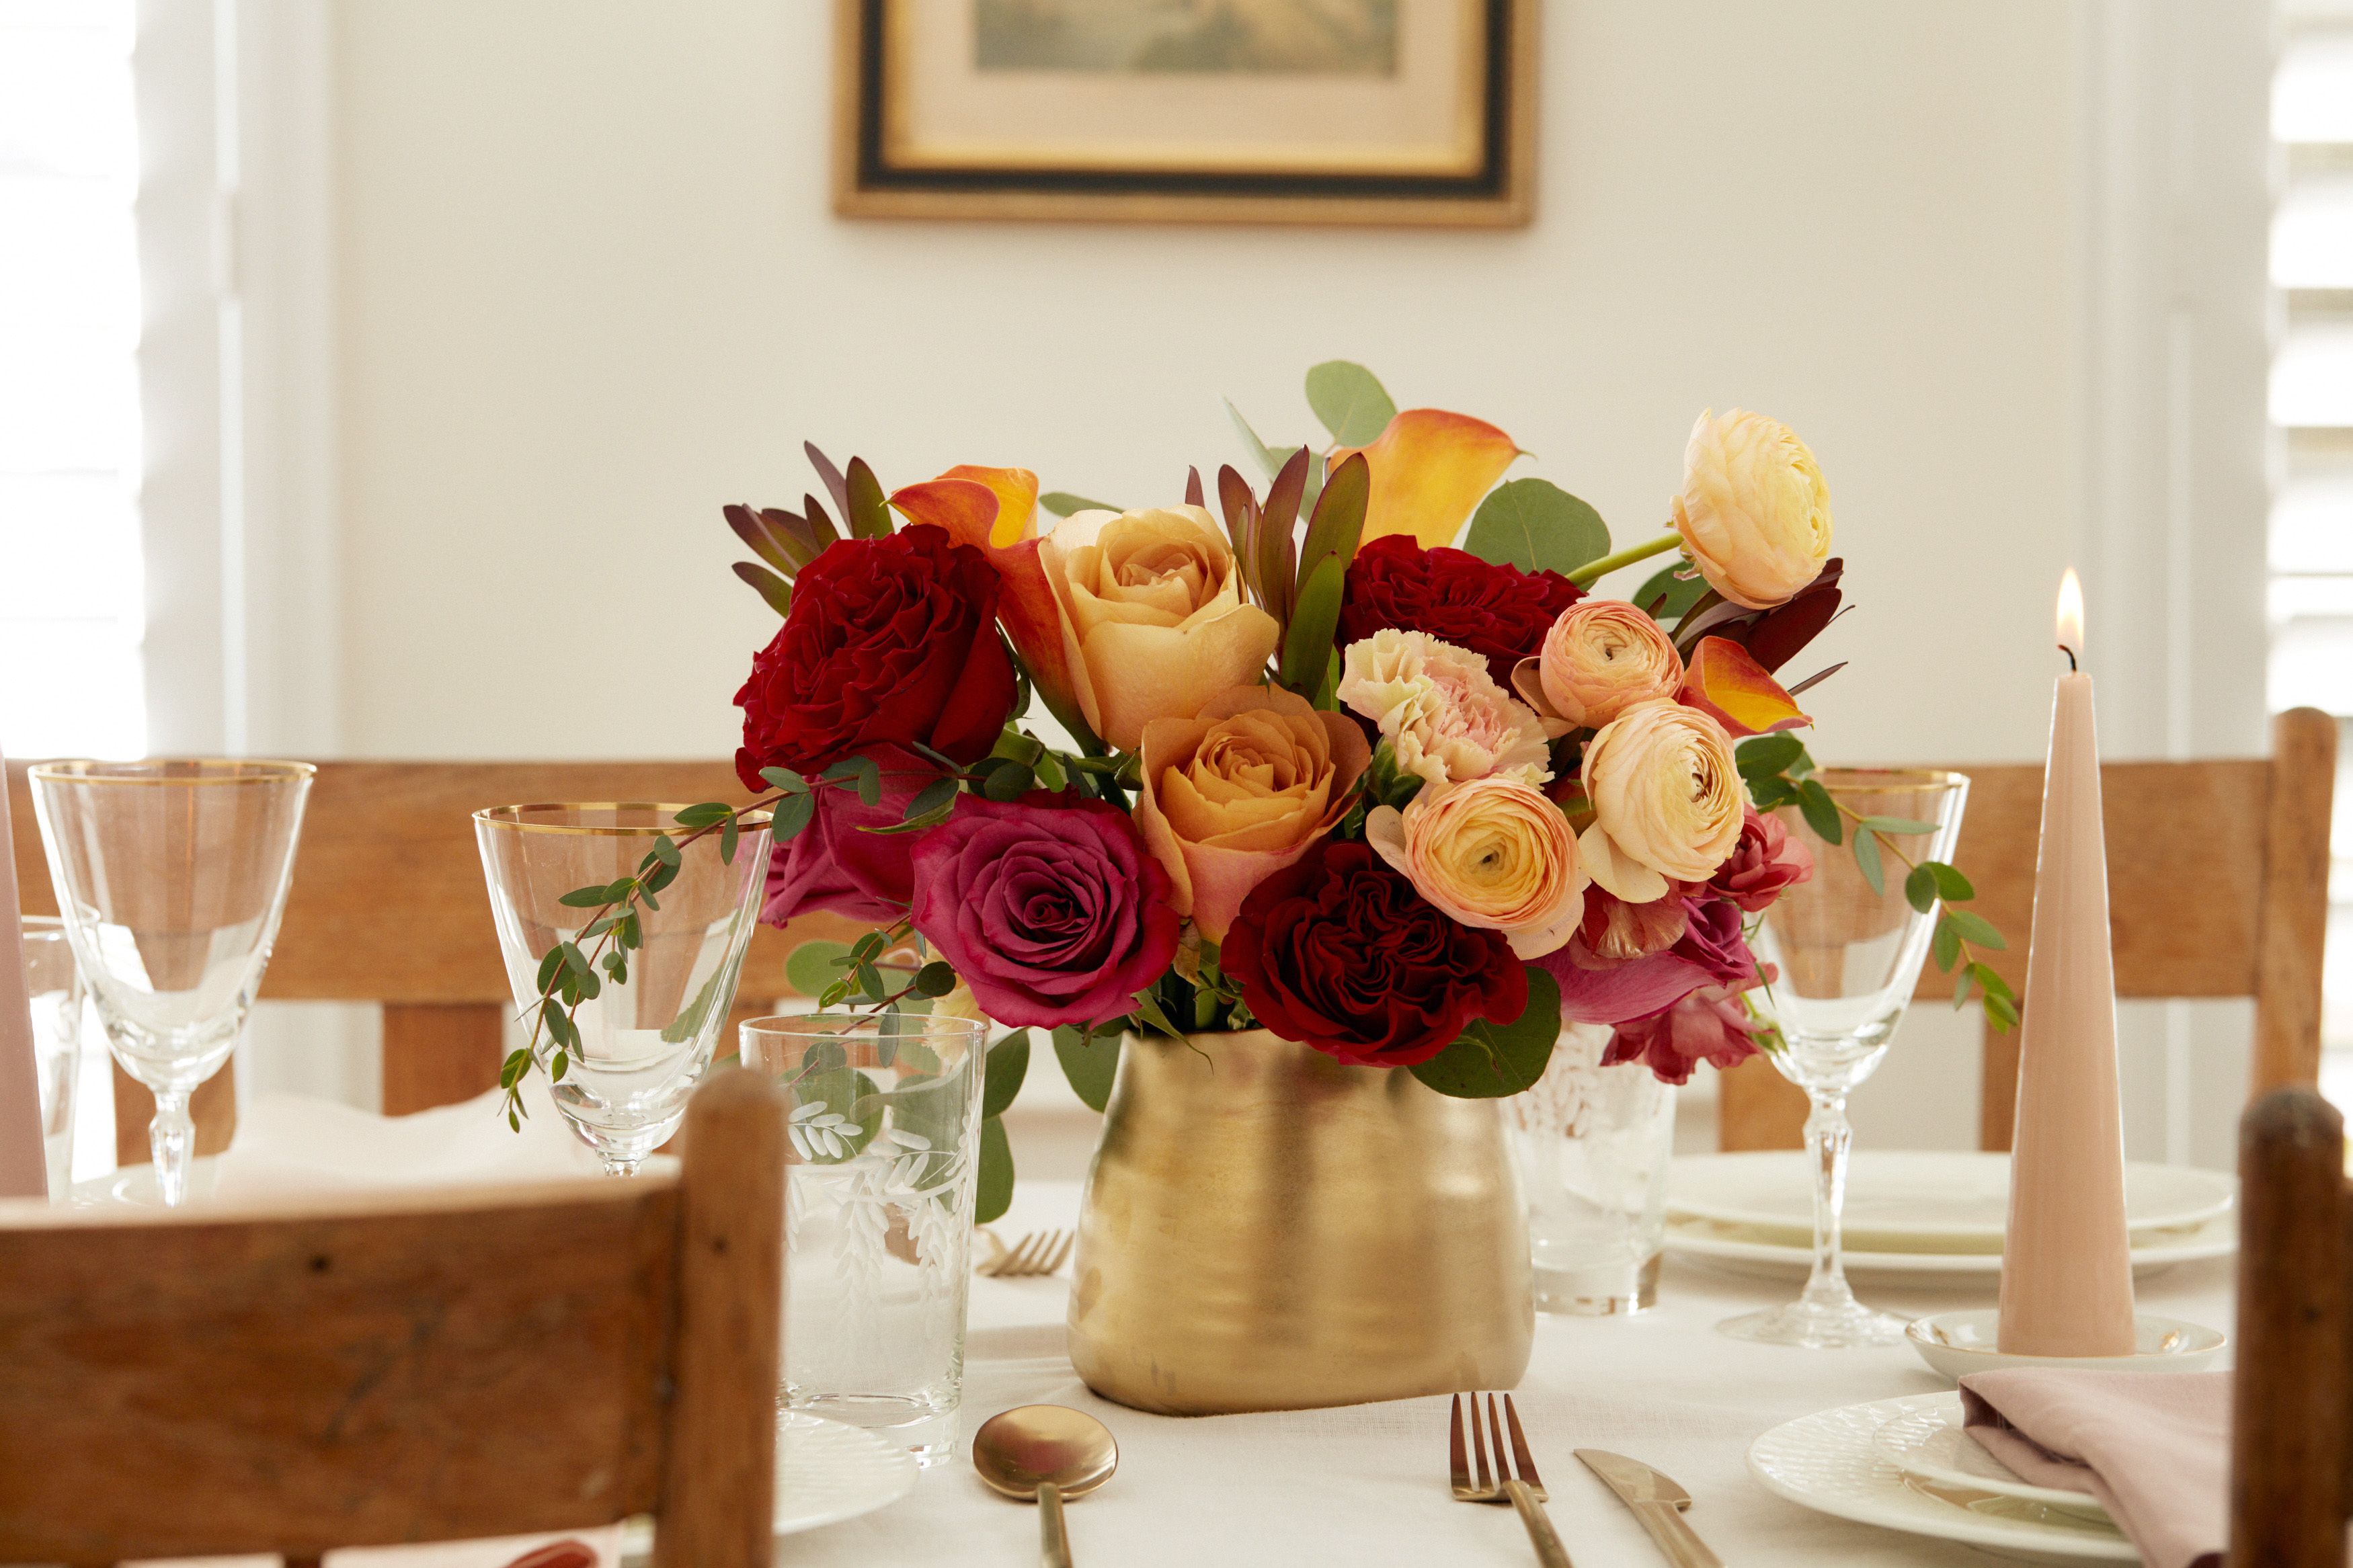 The Gold Rush, a floral centerpiece featured during a holiday evening party.